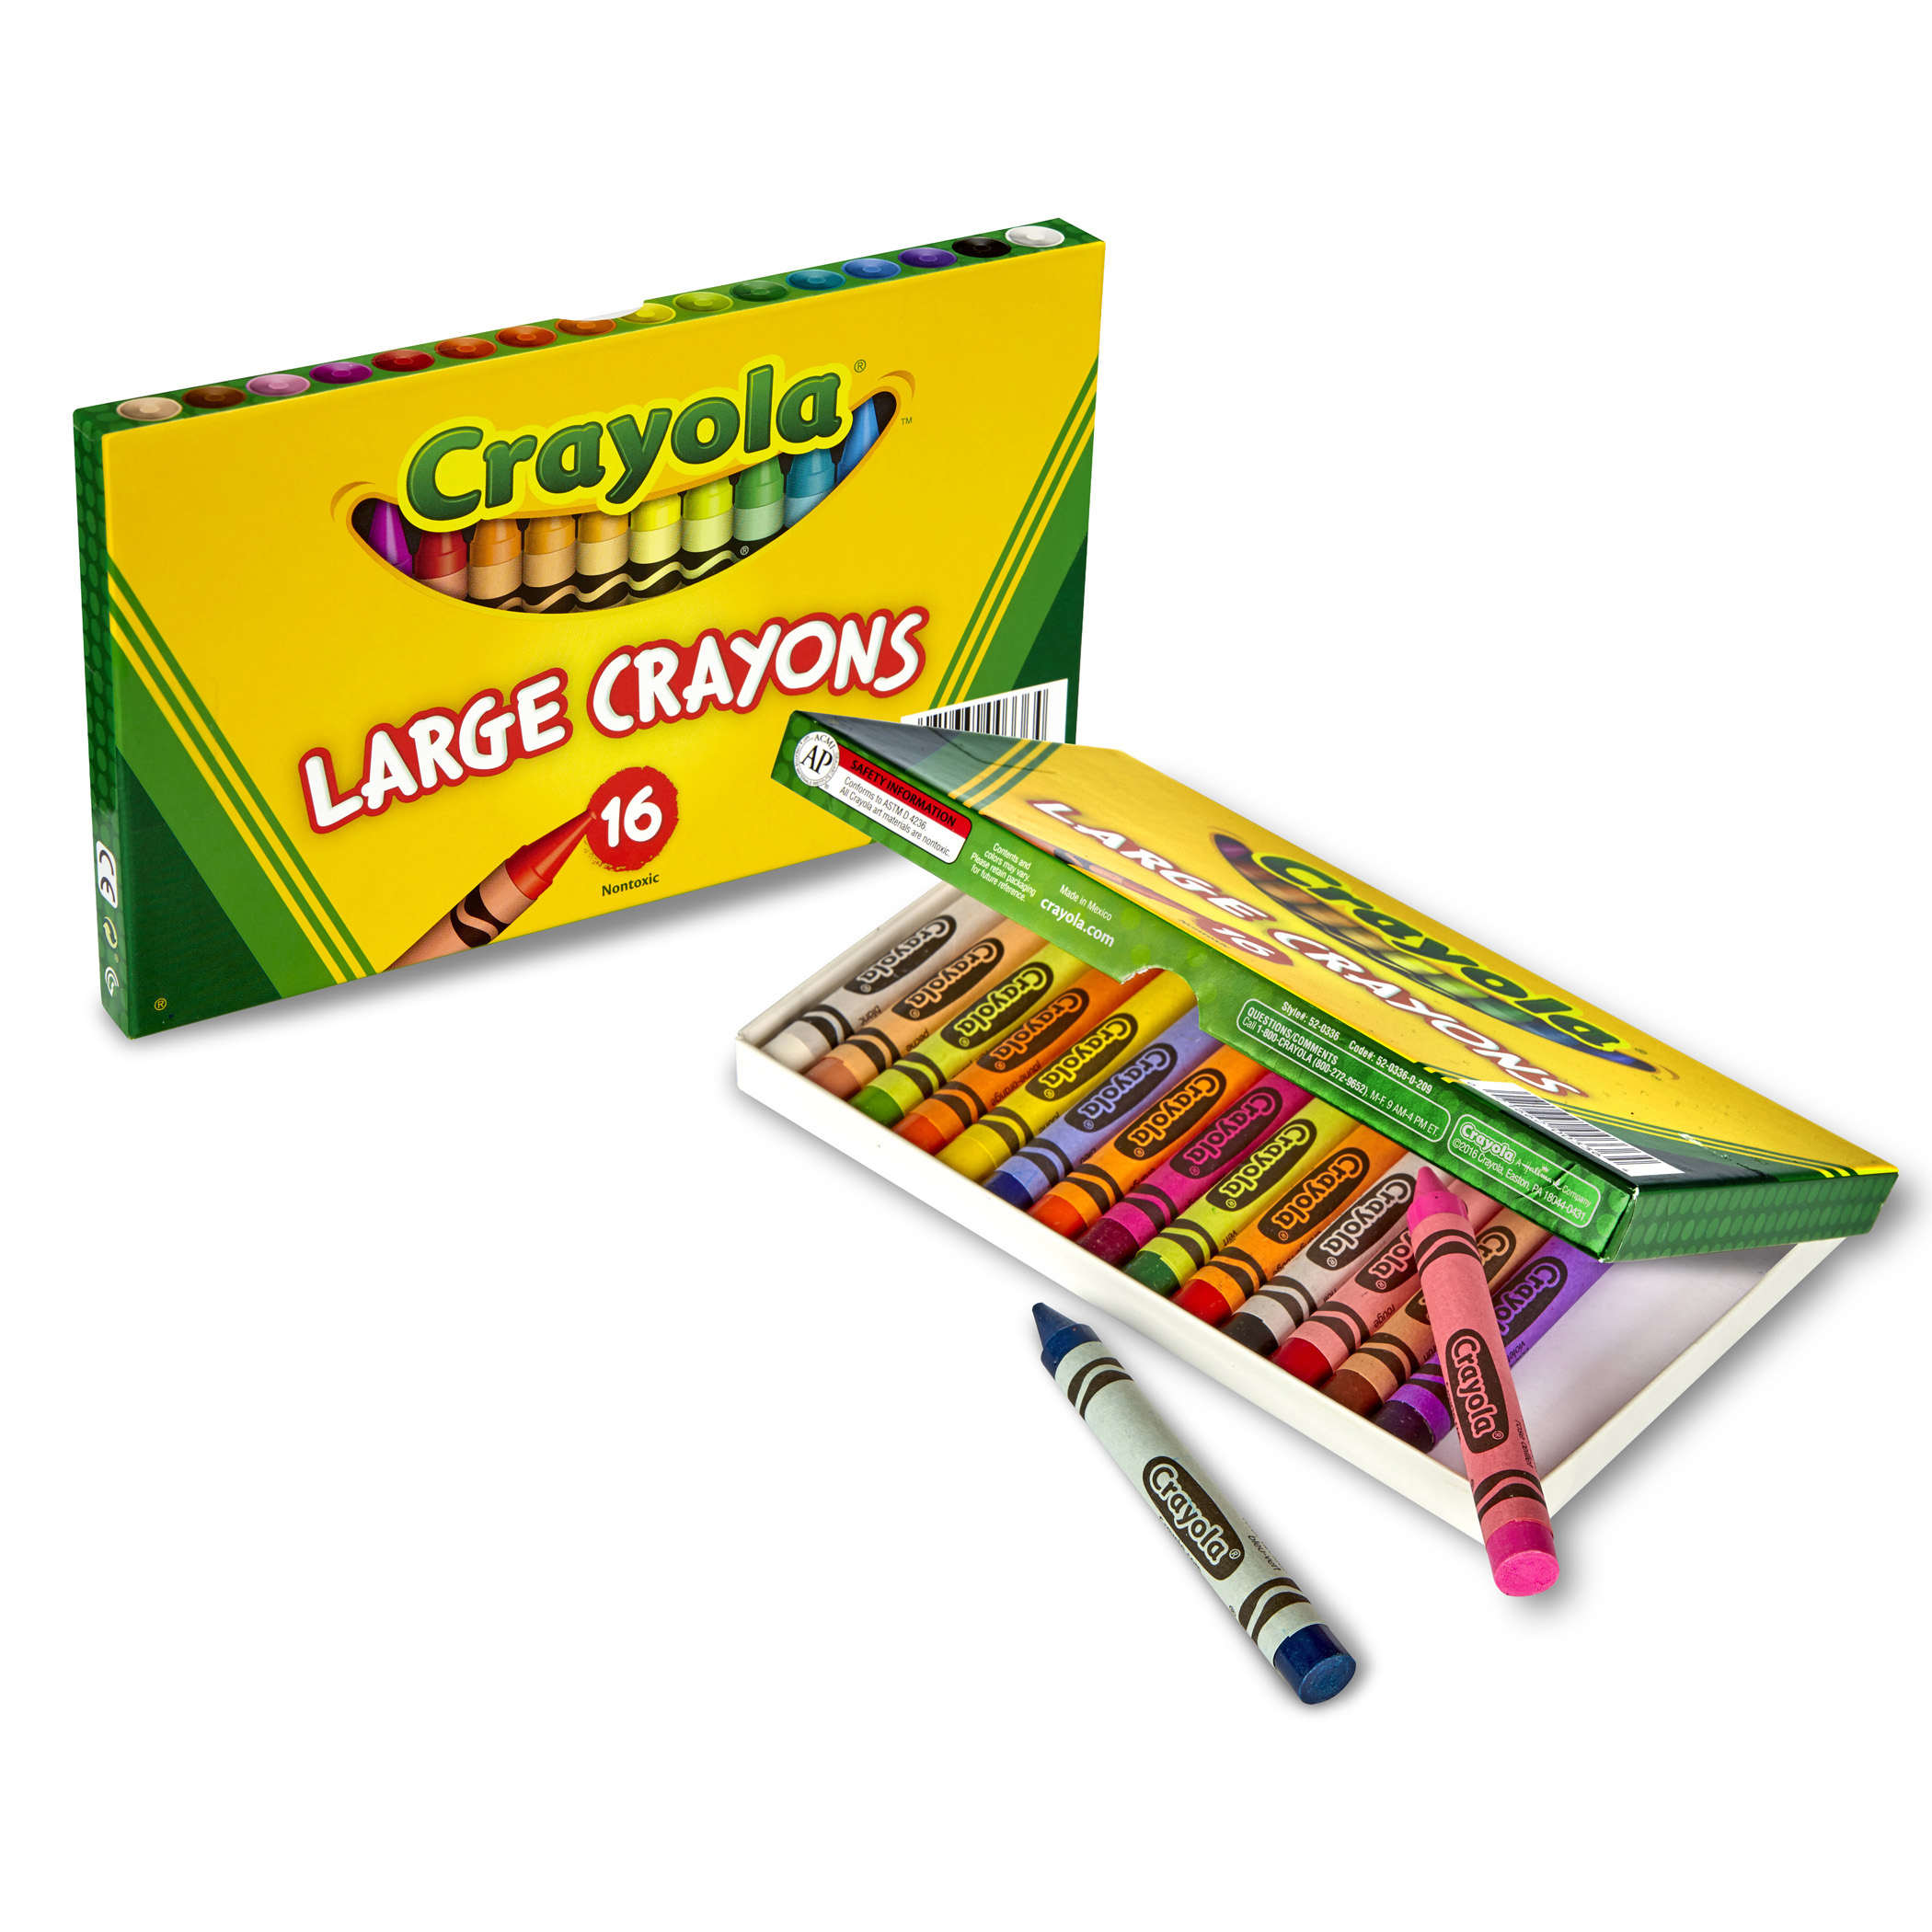 Large Crayons, 16 Count Assorted Colors Crayons, 1  